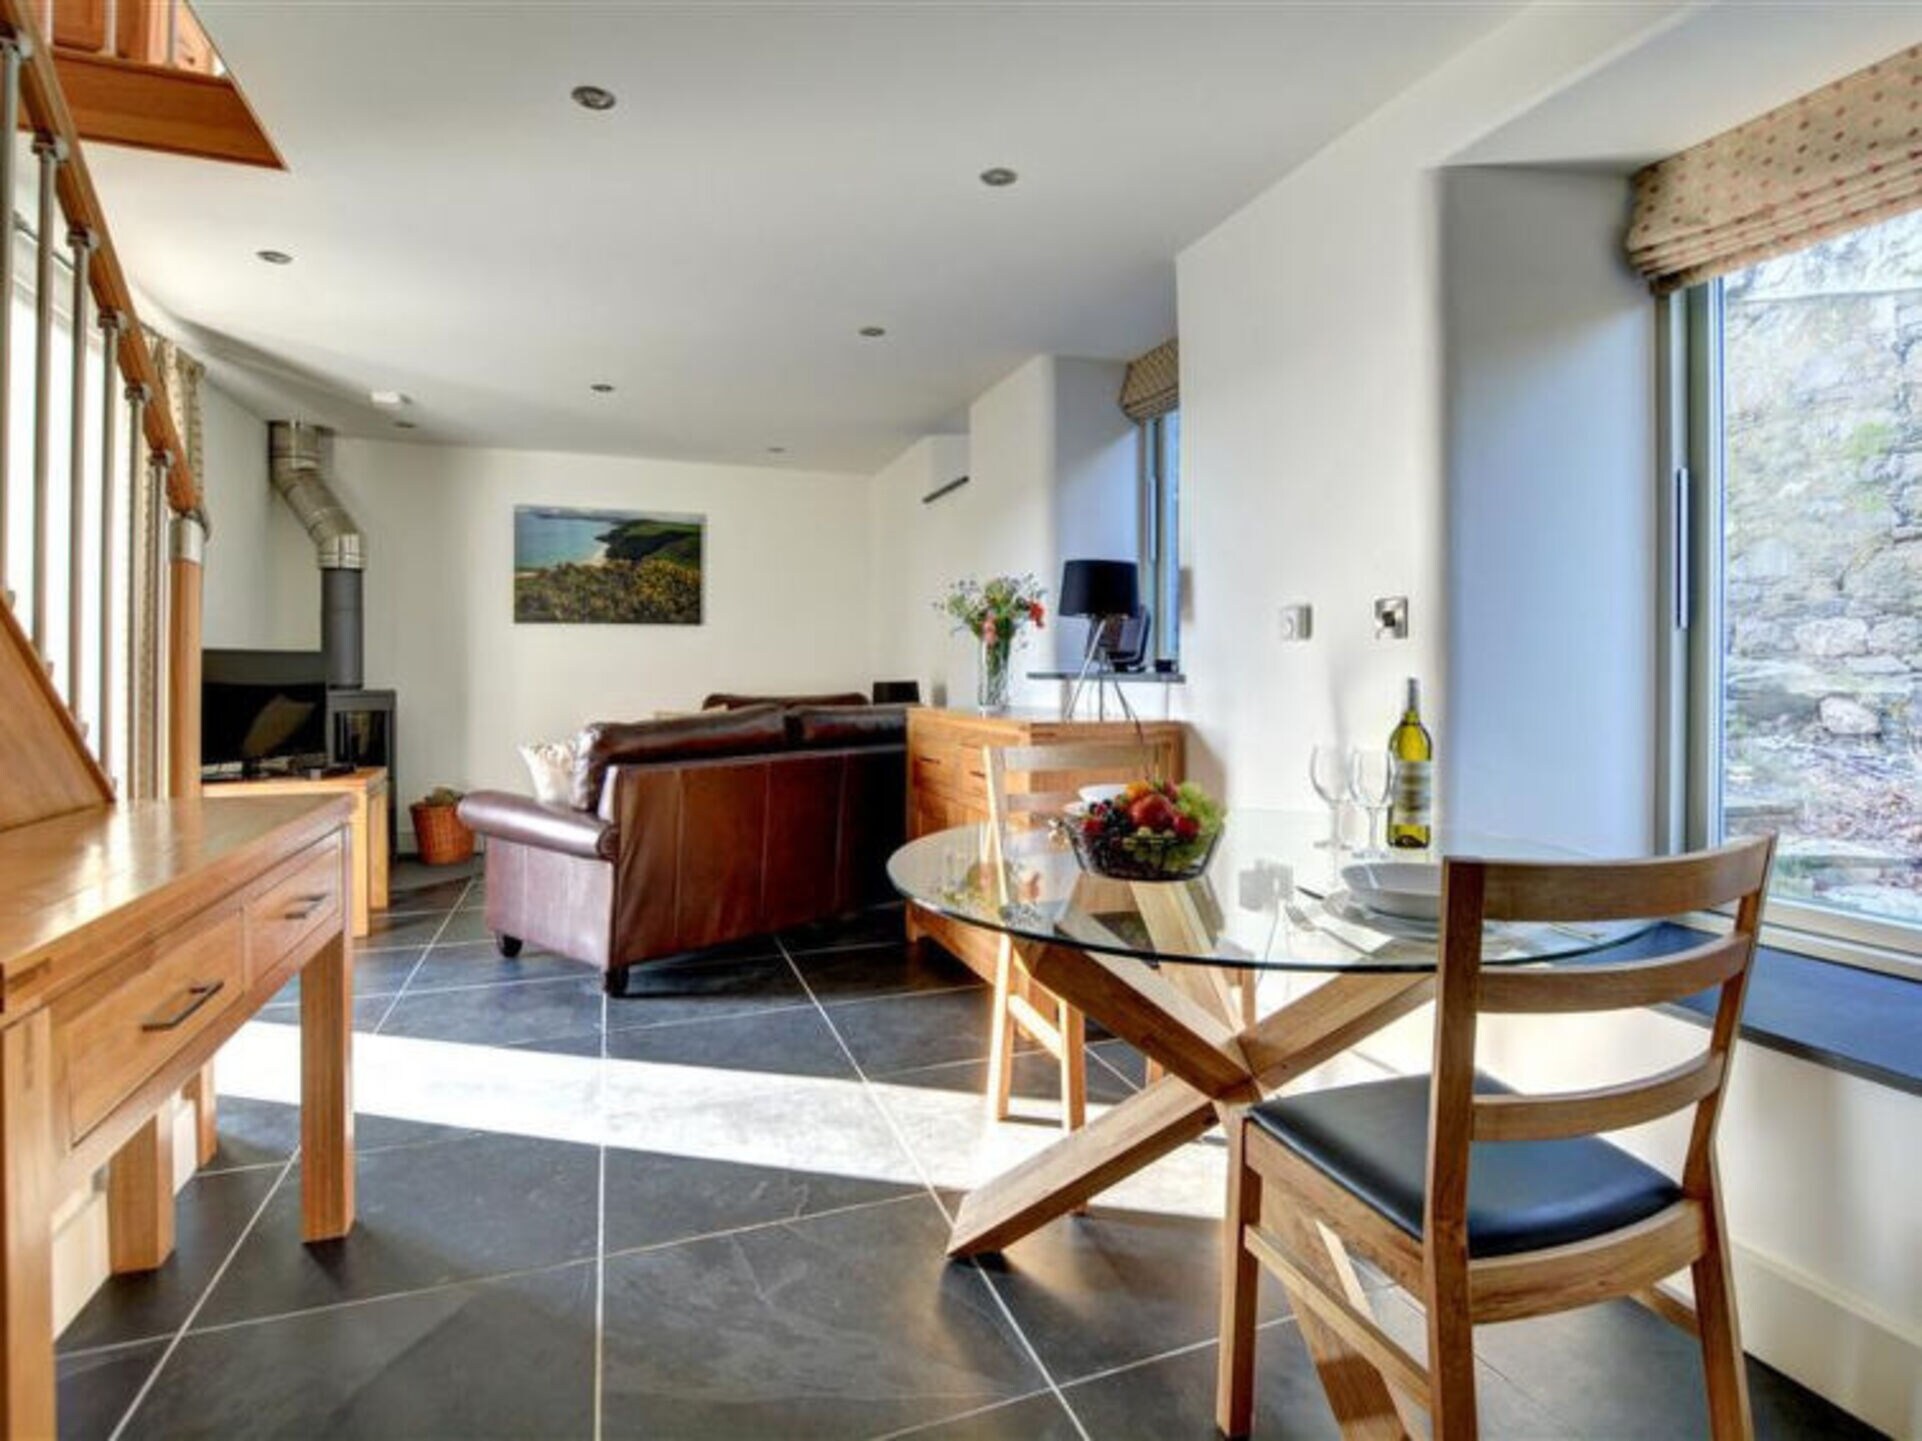 Property Image 2 - Property Manager Villa with First Class Amenities, England Villa 1238